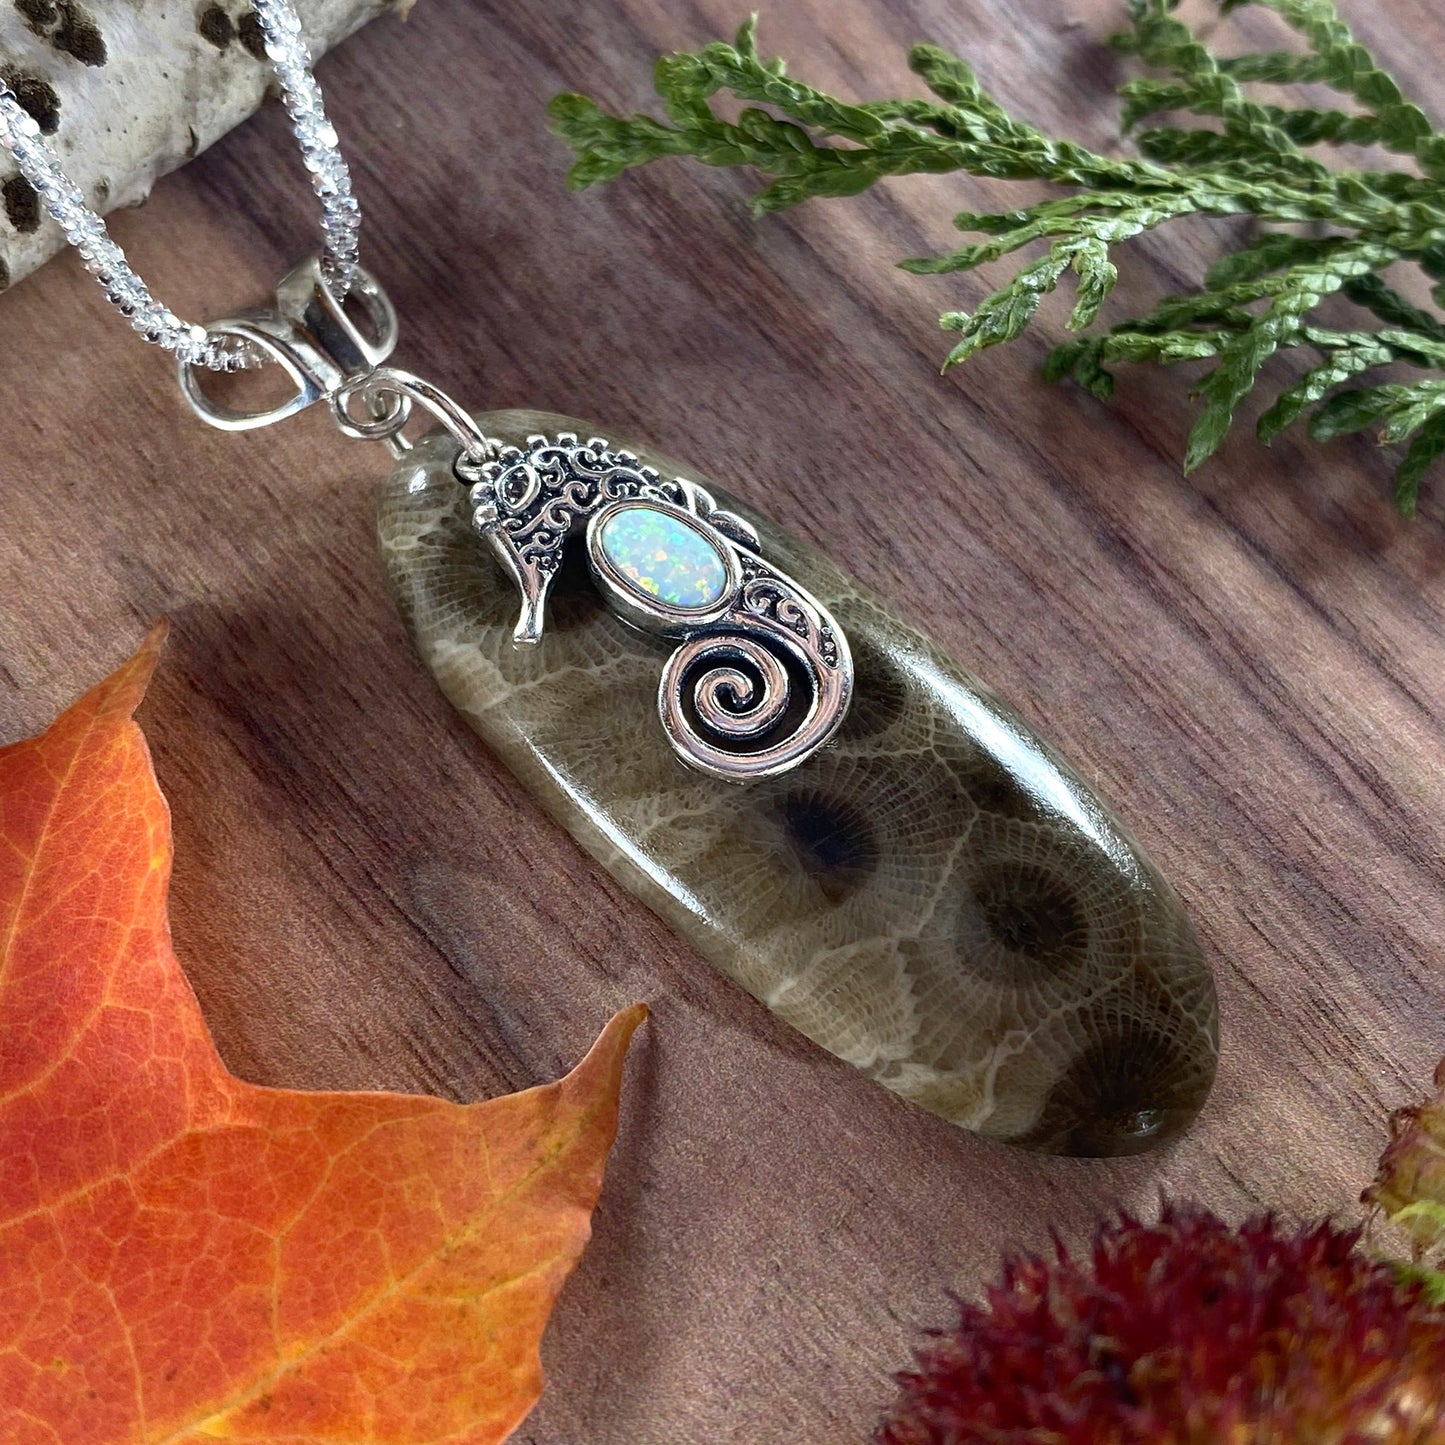 Petoskey Stone Seahorse Charm Pendant Front View II - Stone Treasures by the Lake